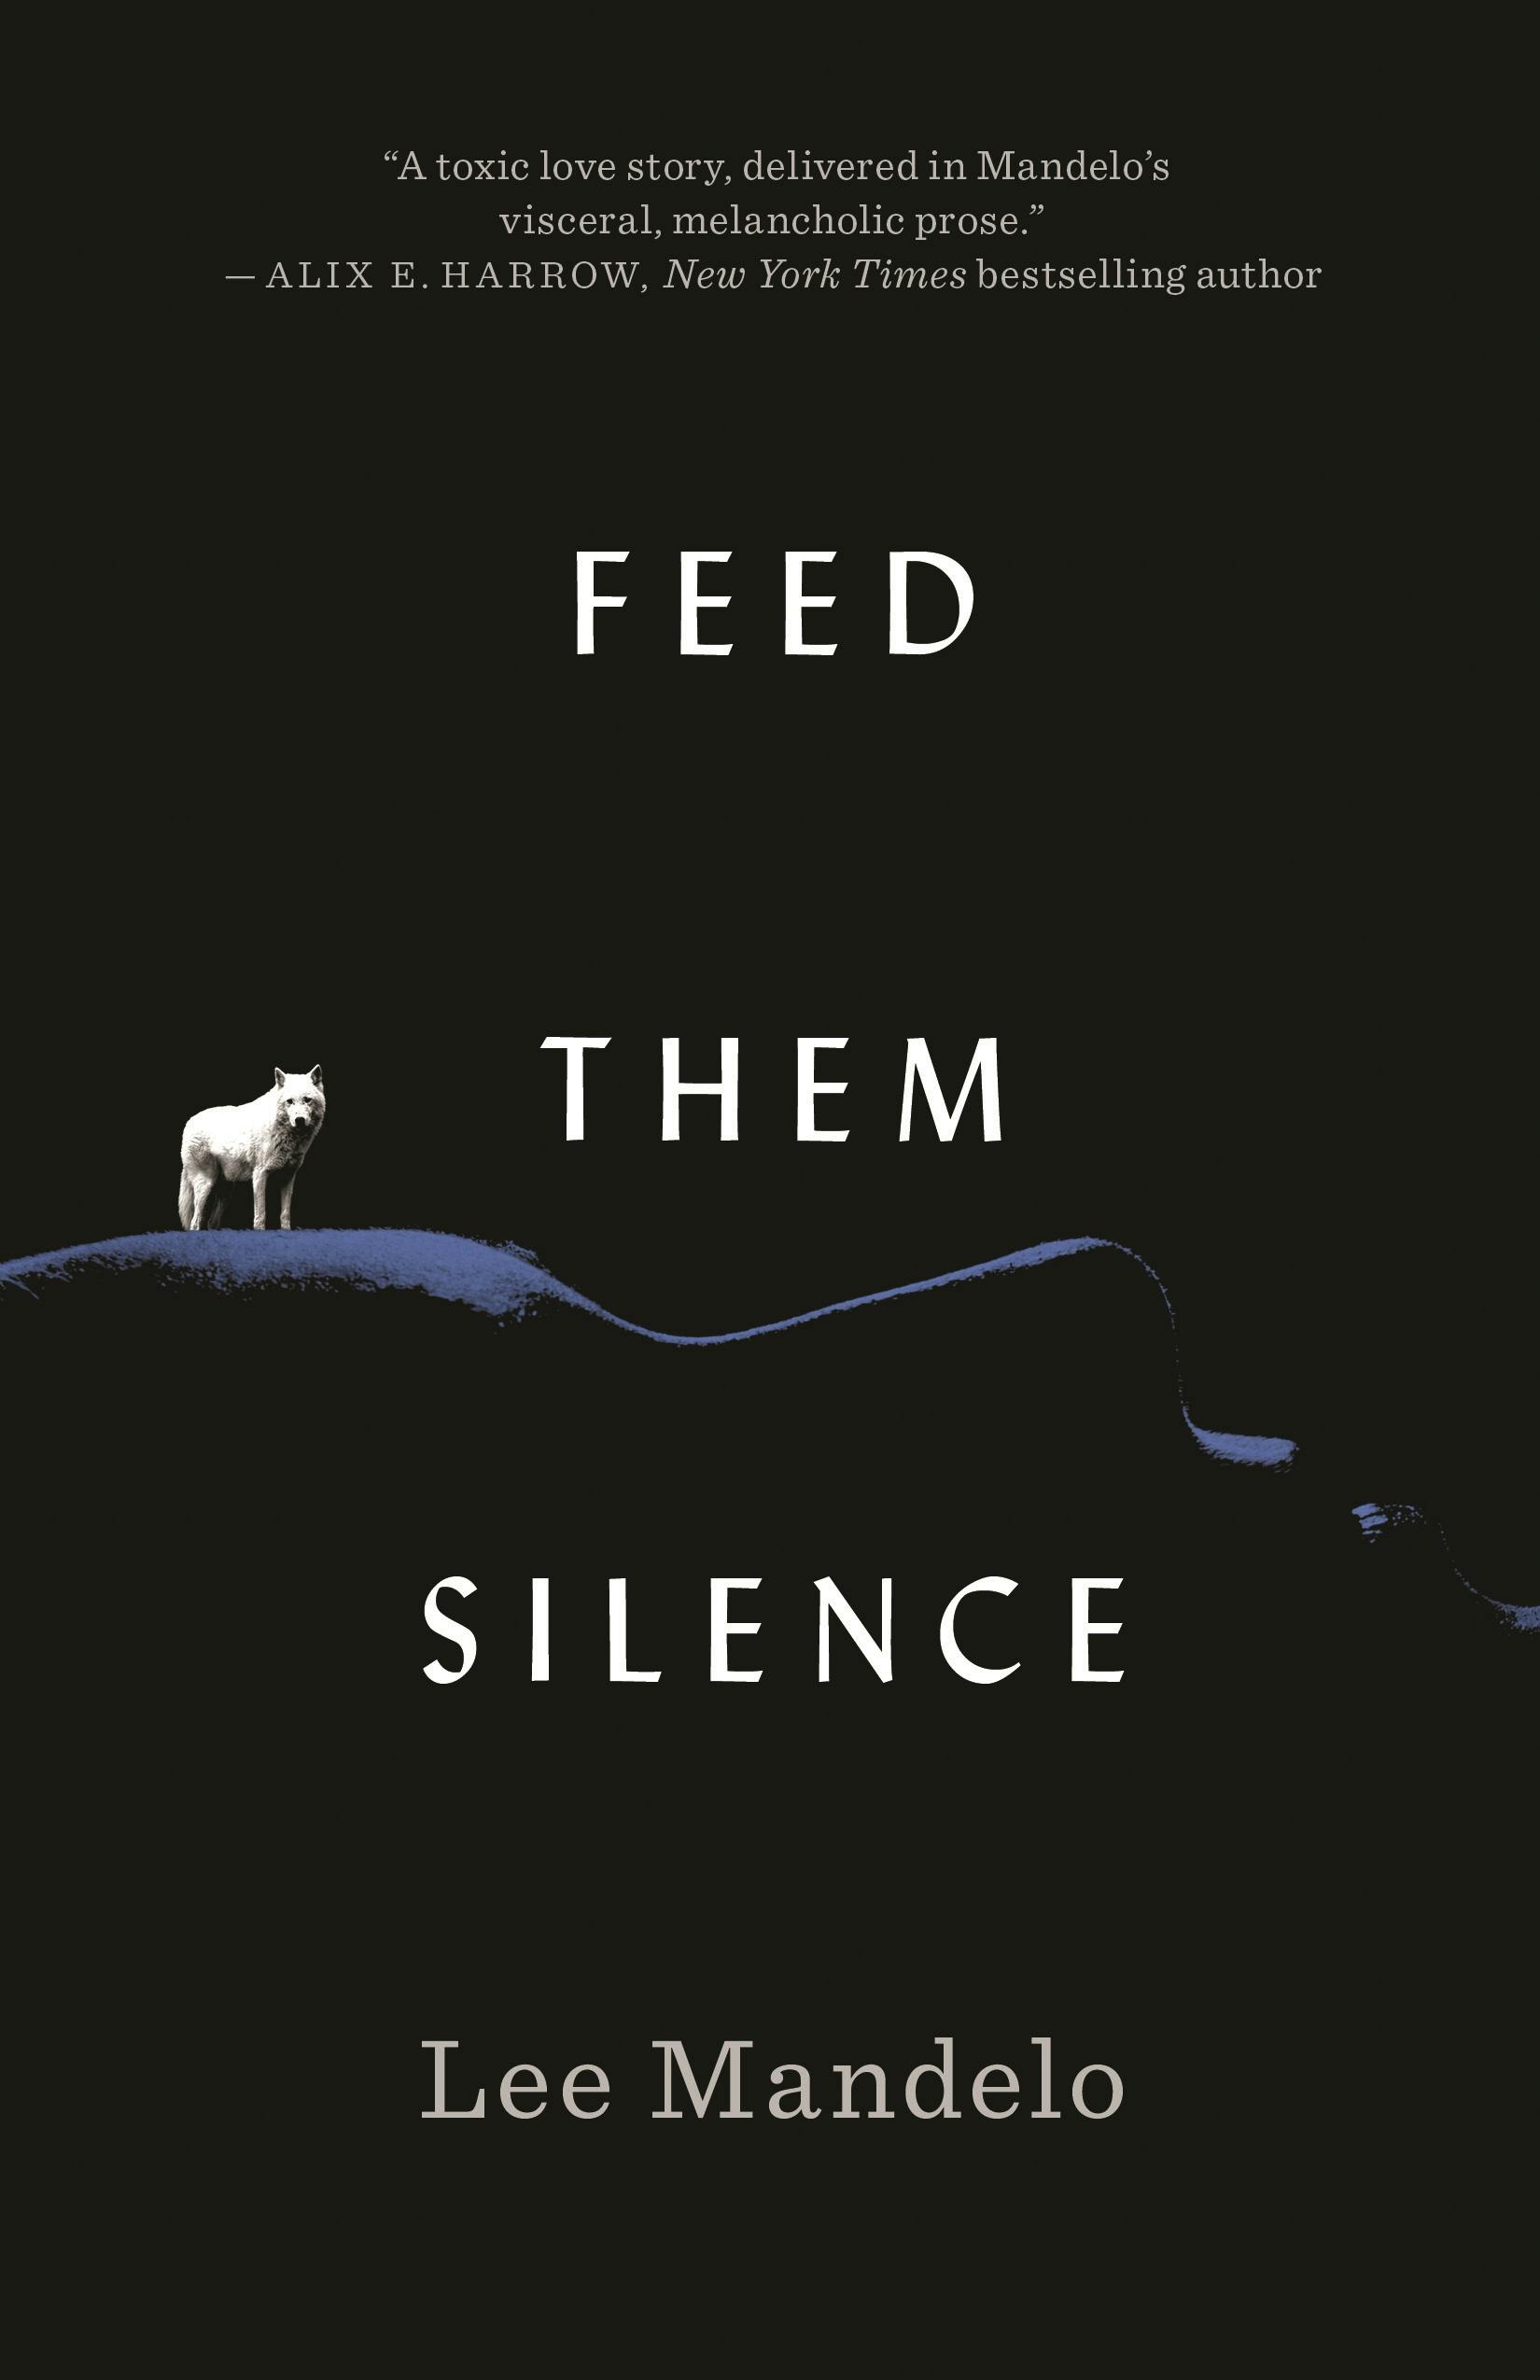 Cover for the book titled as: Feed Them Silence